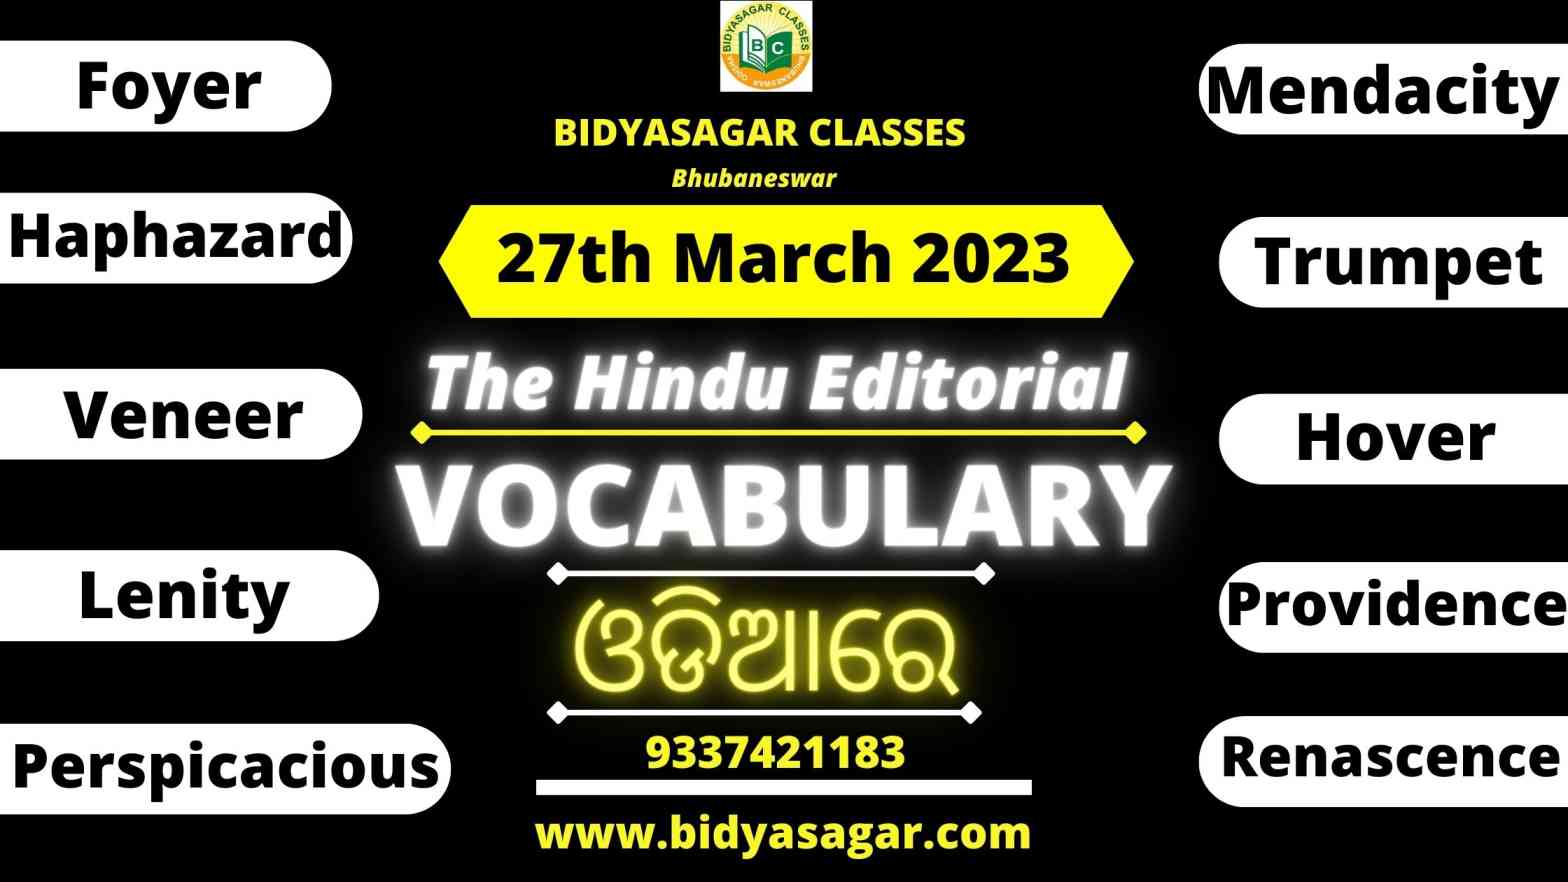 The Hindu Editorial Vocabulary of 27th March 2023